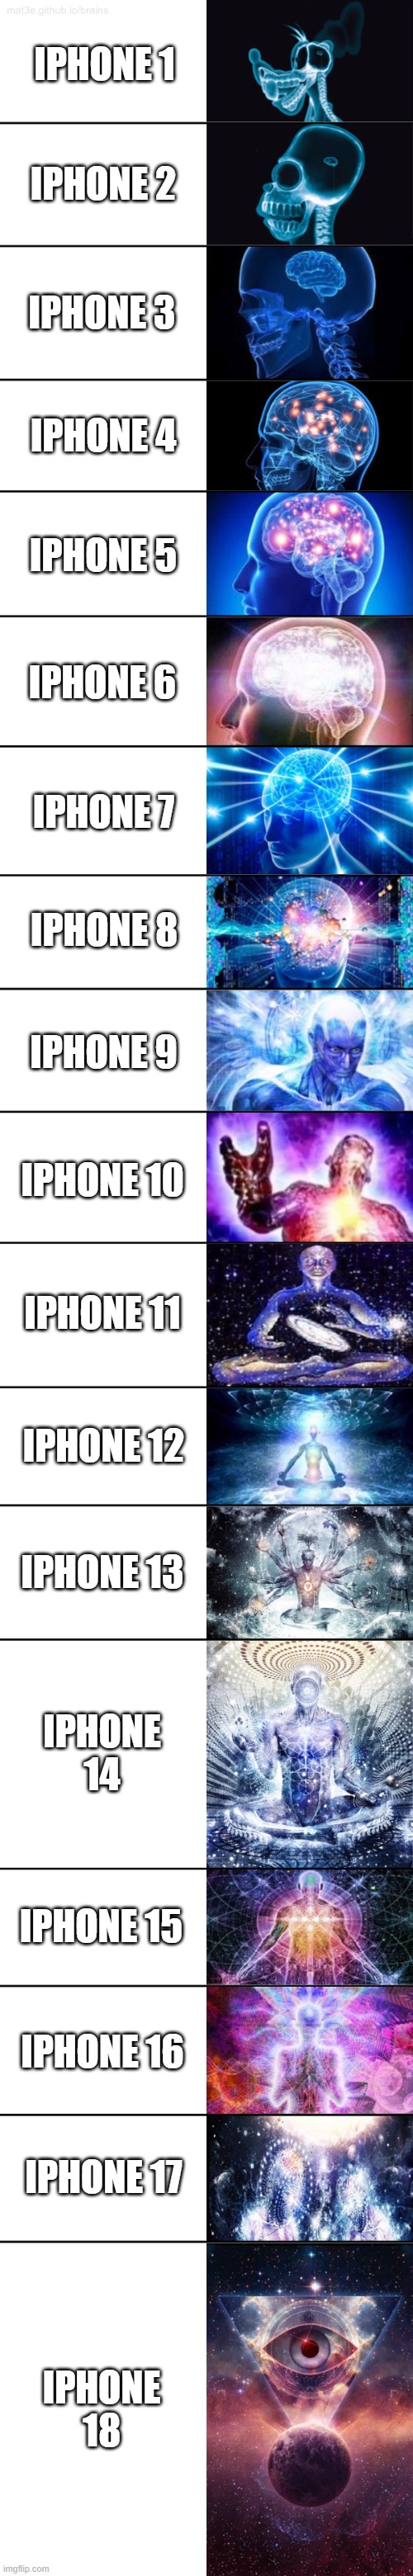 History of iPhone | IPHONE 1; IPHONE 2; IPHONE 3; IPHONE 4; IPHONE 5; IPHONE 6; IPHONE 7; IPHONE 8; IPHONE 9; IPHONE 10; IPHONE 11; IPHONE 12; IPHONE 13; IPHONE 14; IPHONE 15; IPHONE 16; IPHONE 17; IPHONE 18 | image tagged in expanding brain 18 panels,iphone,history,evolution | made w/ Imgflip meme maker